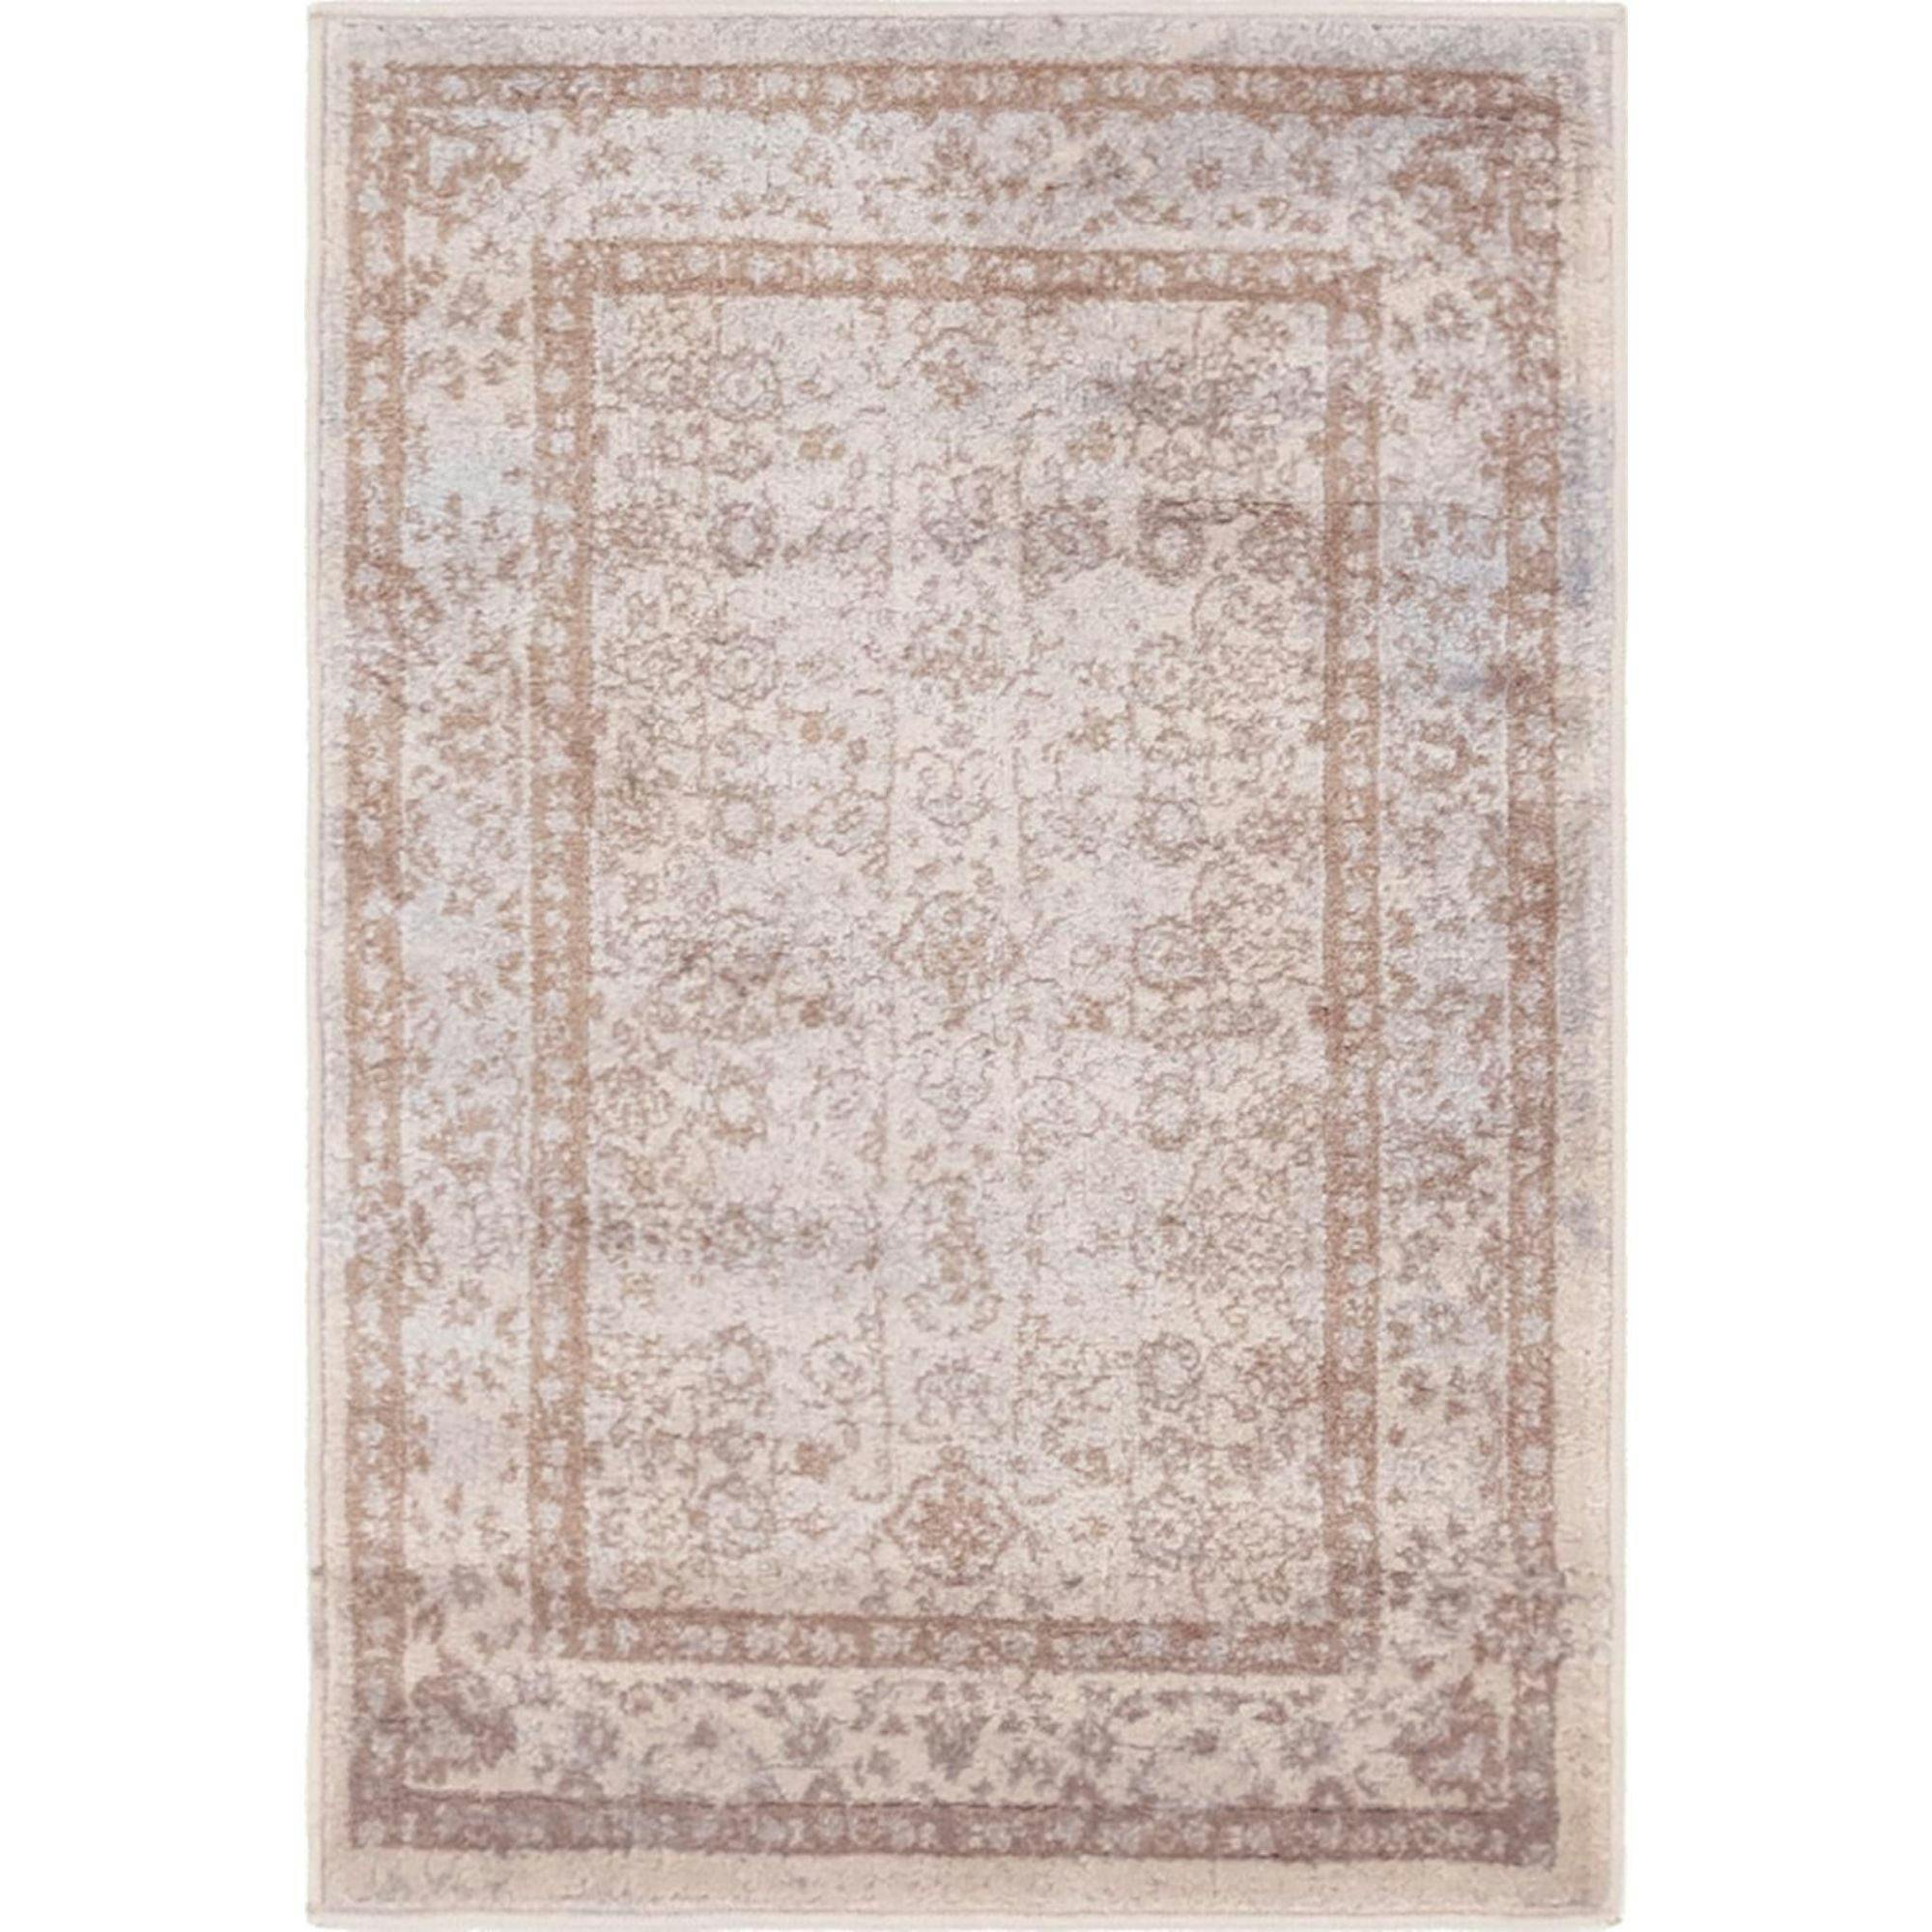 Estate Cream and Ivory 3x5 Easy-Care Synthetic Area Rug